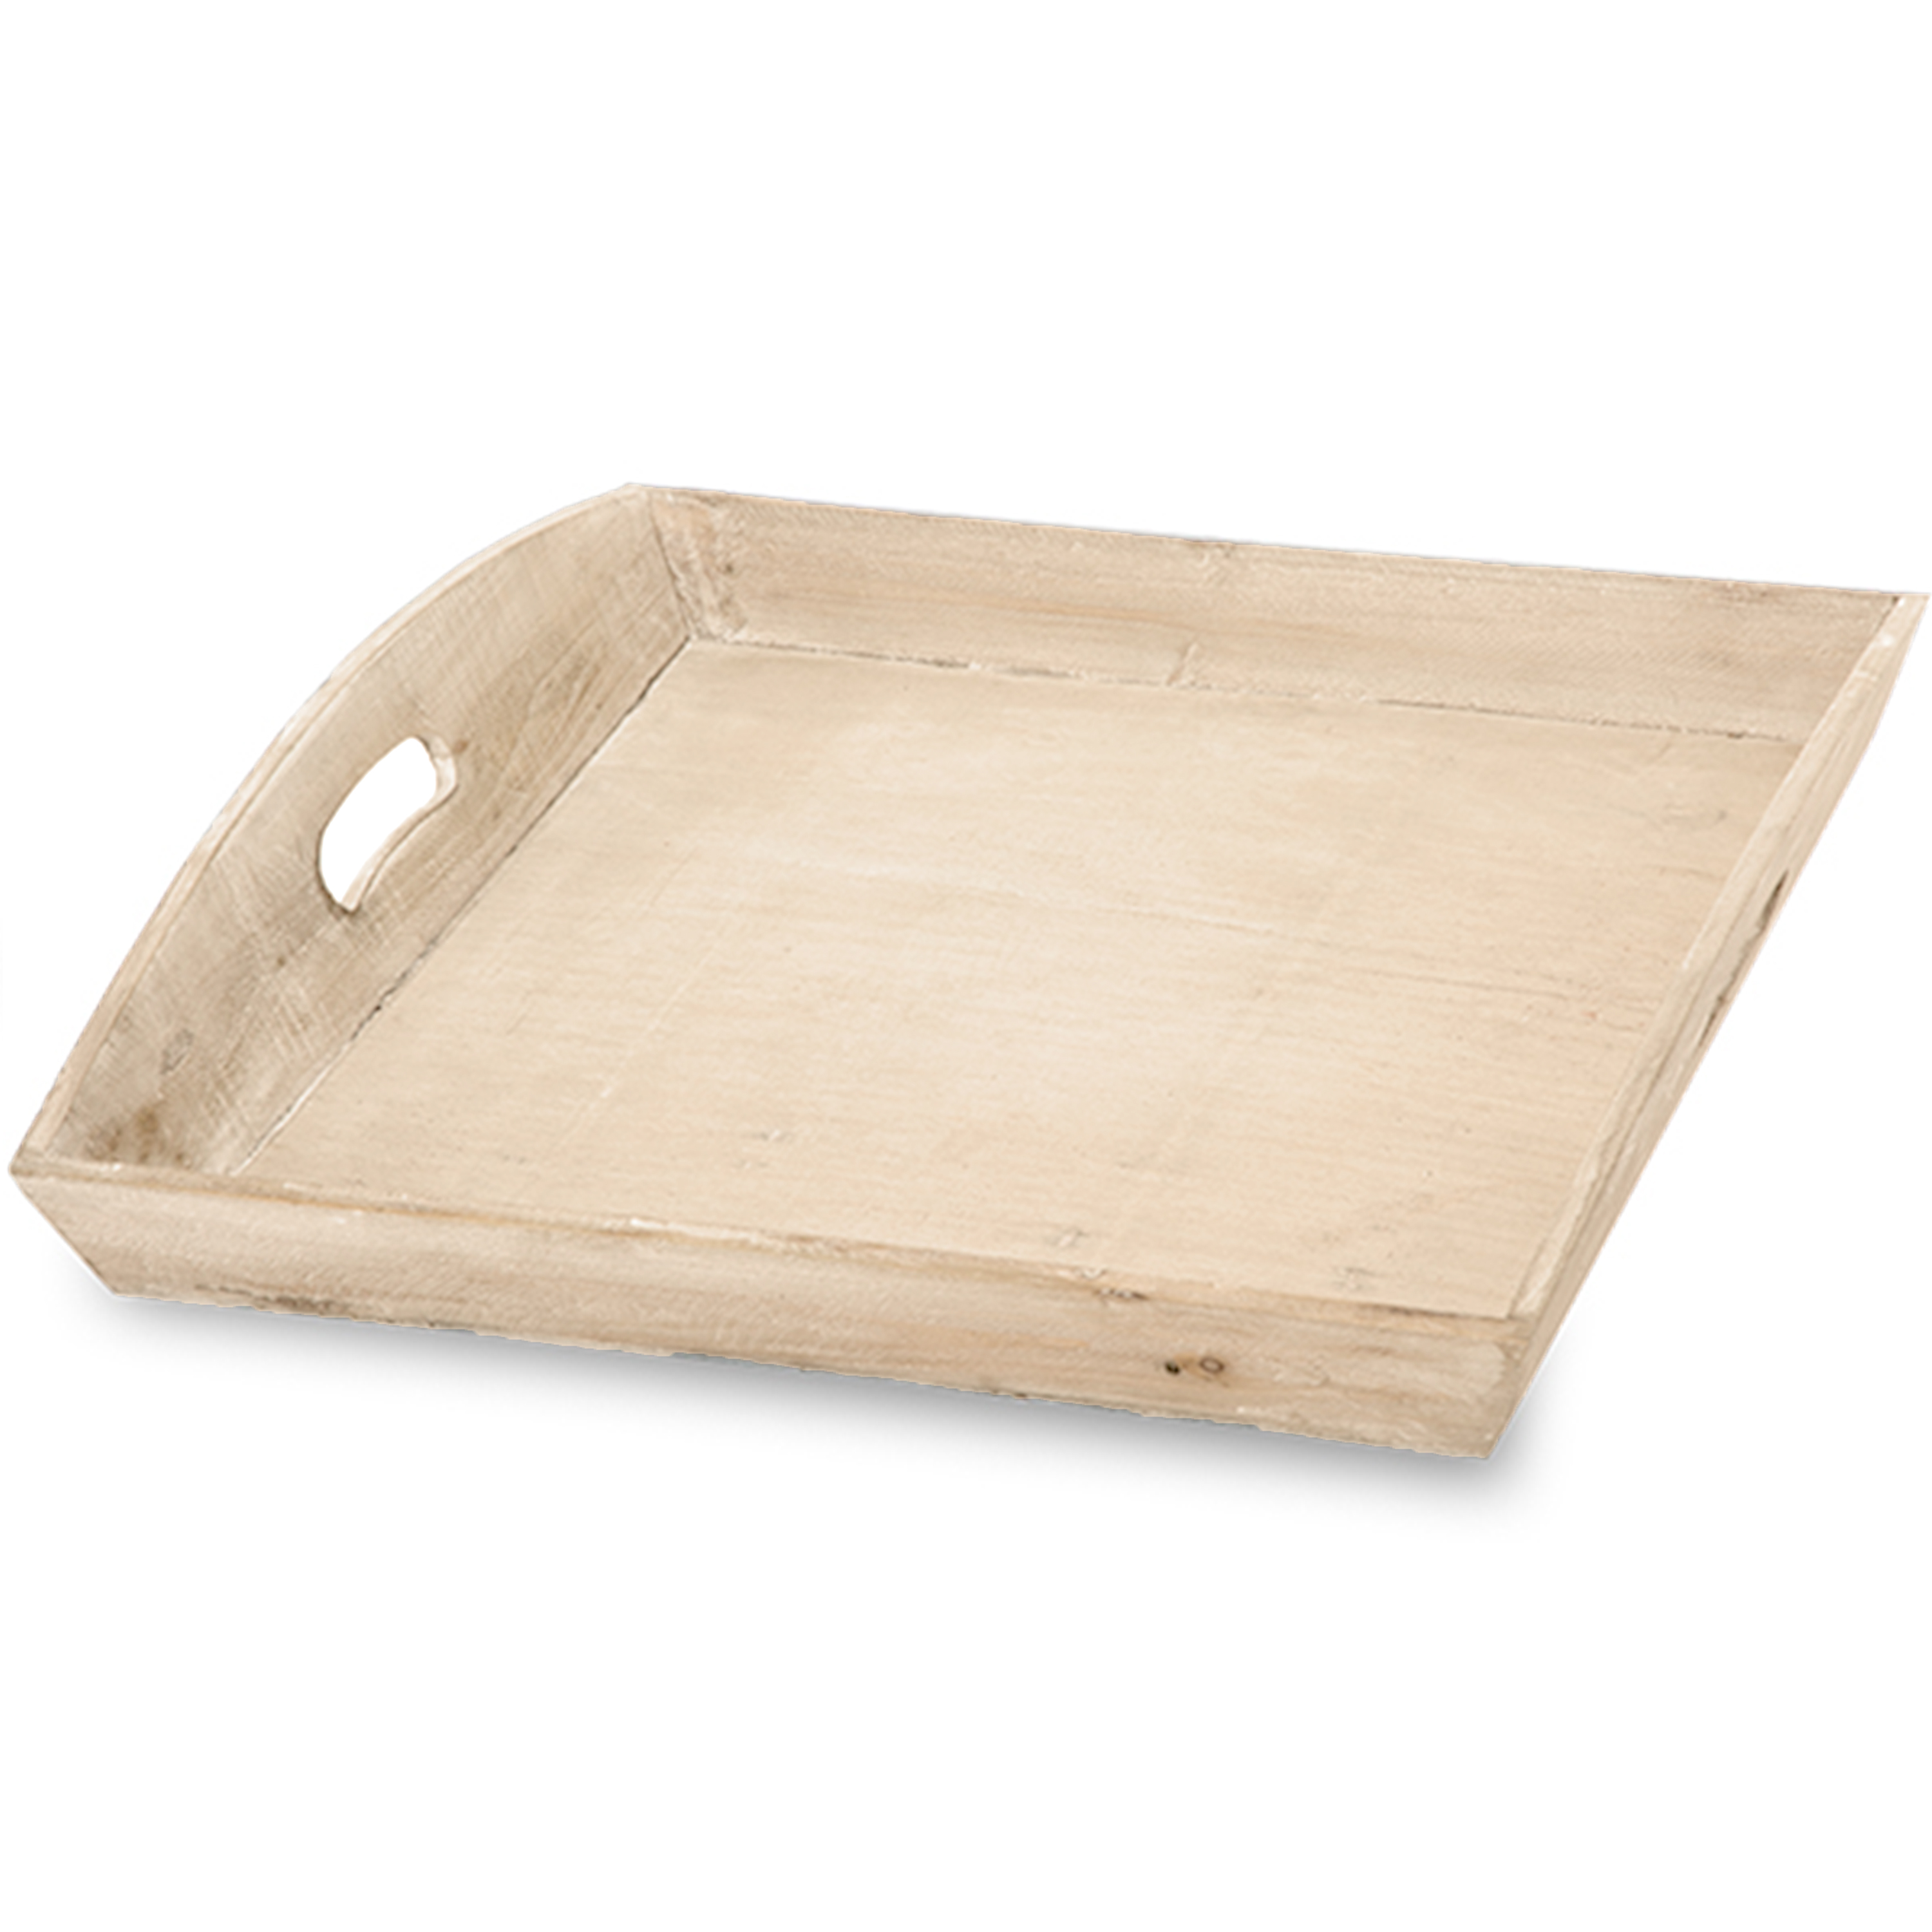 Medium Wooden Square Tray with Chalkboard Bottom 16in